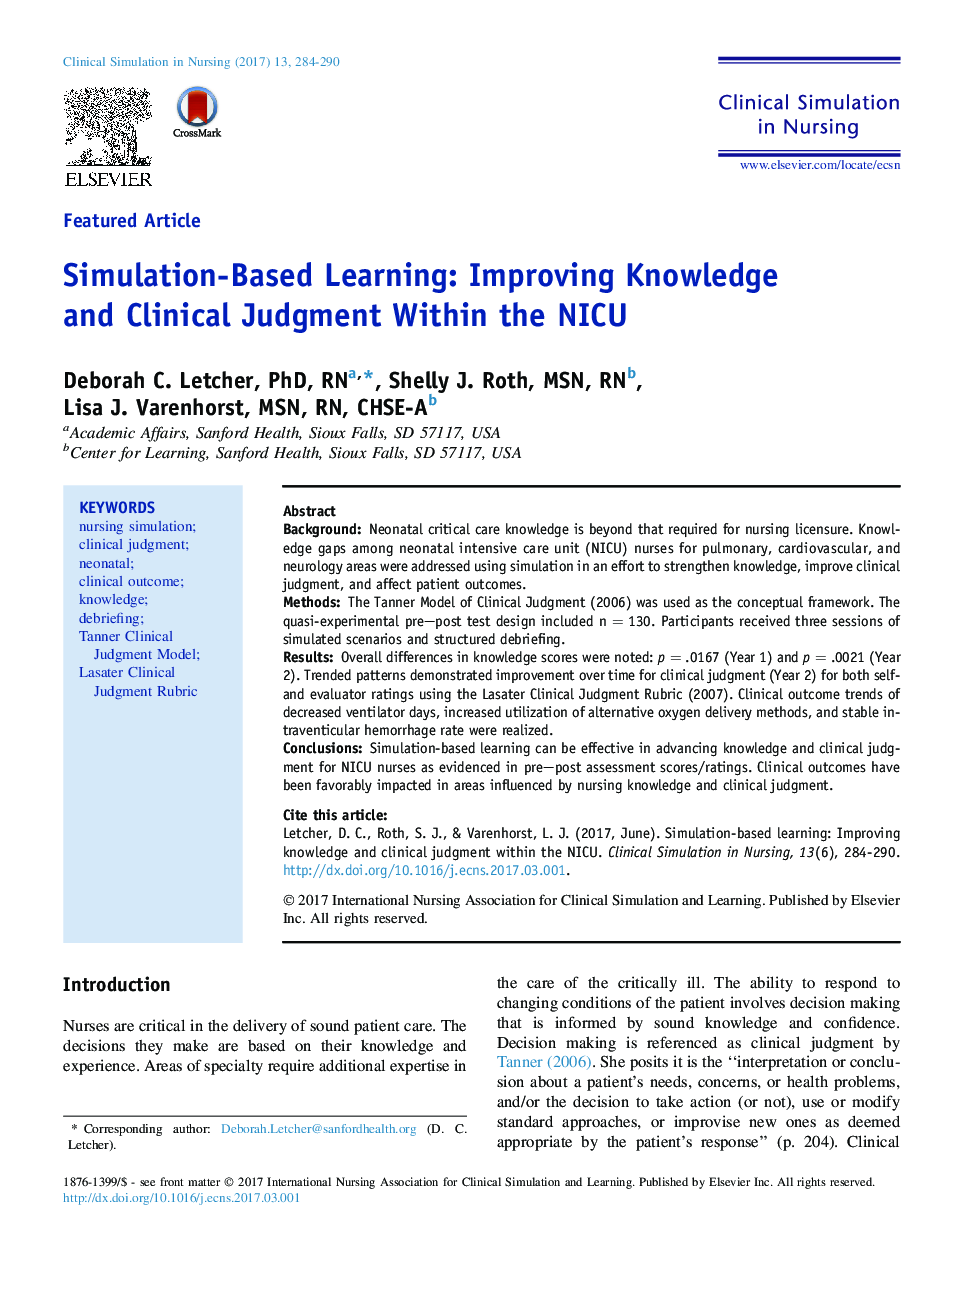 Simulation-Based Learning: Improving Knowledge and Clinical Judgment Within the NICU